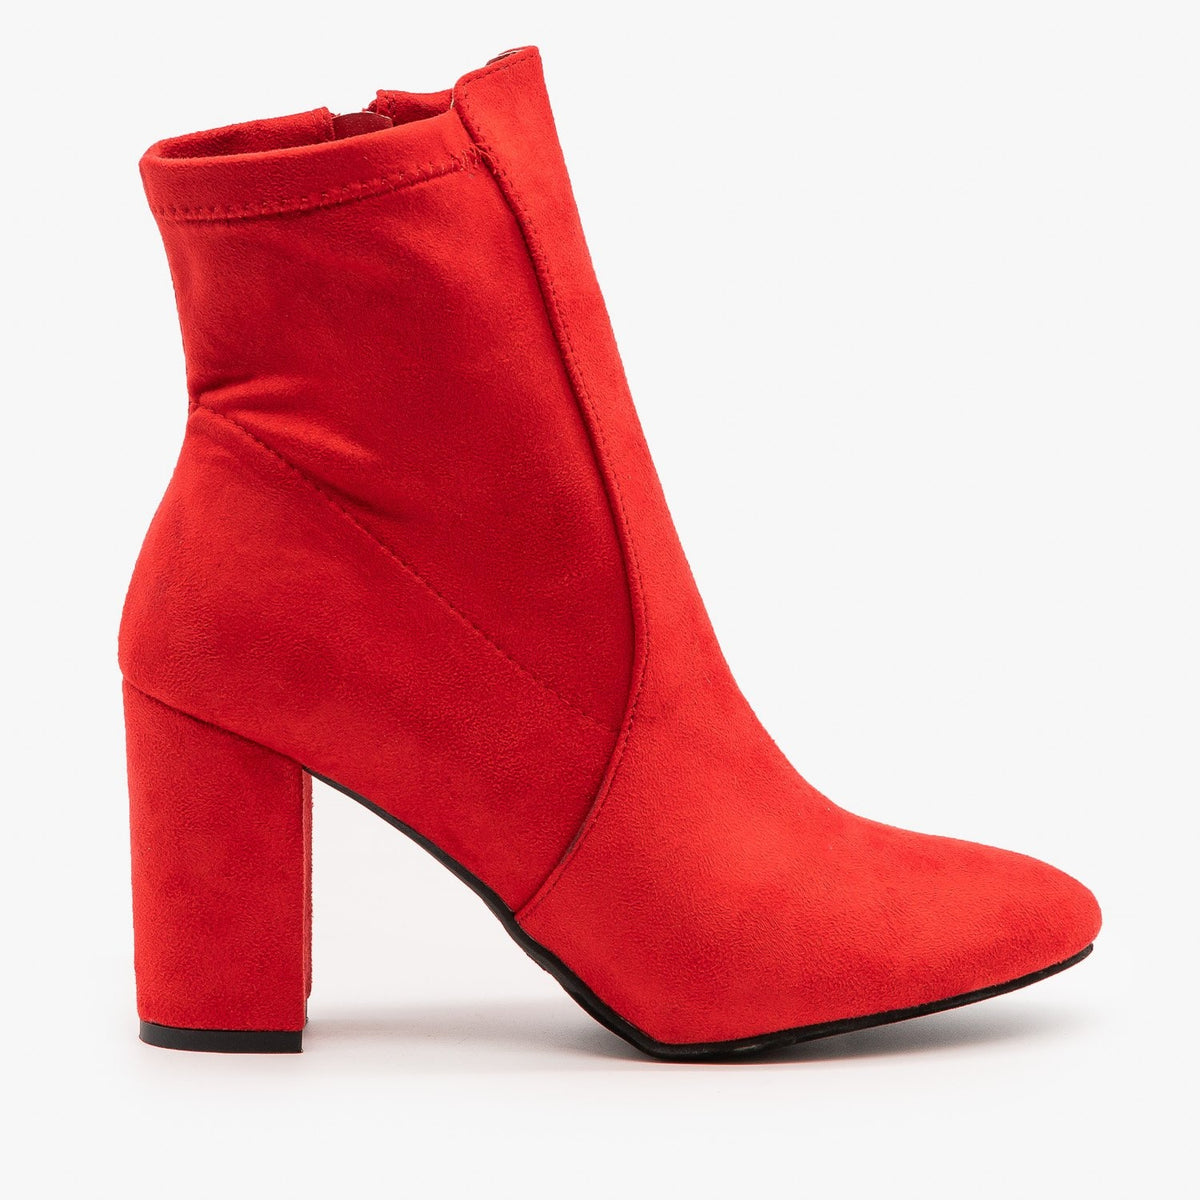 Chic Party Booties - Top Moda Shoes Carris-1 | Shoetopia